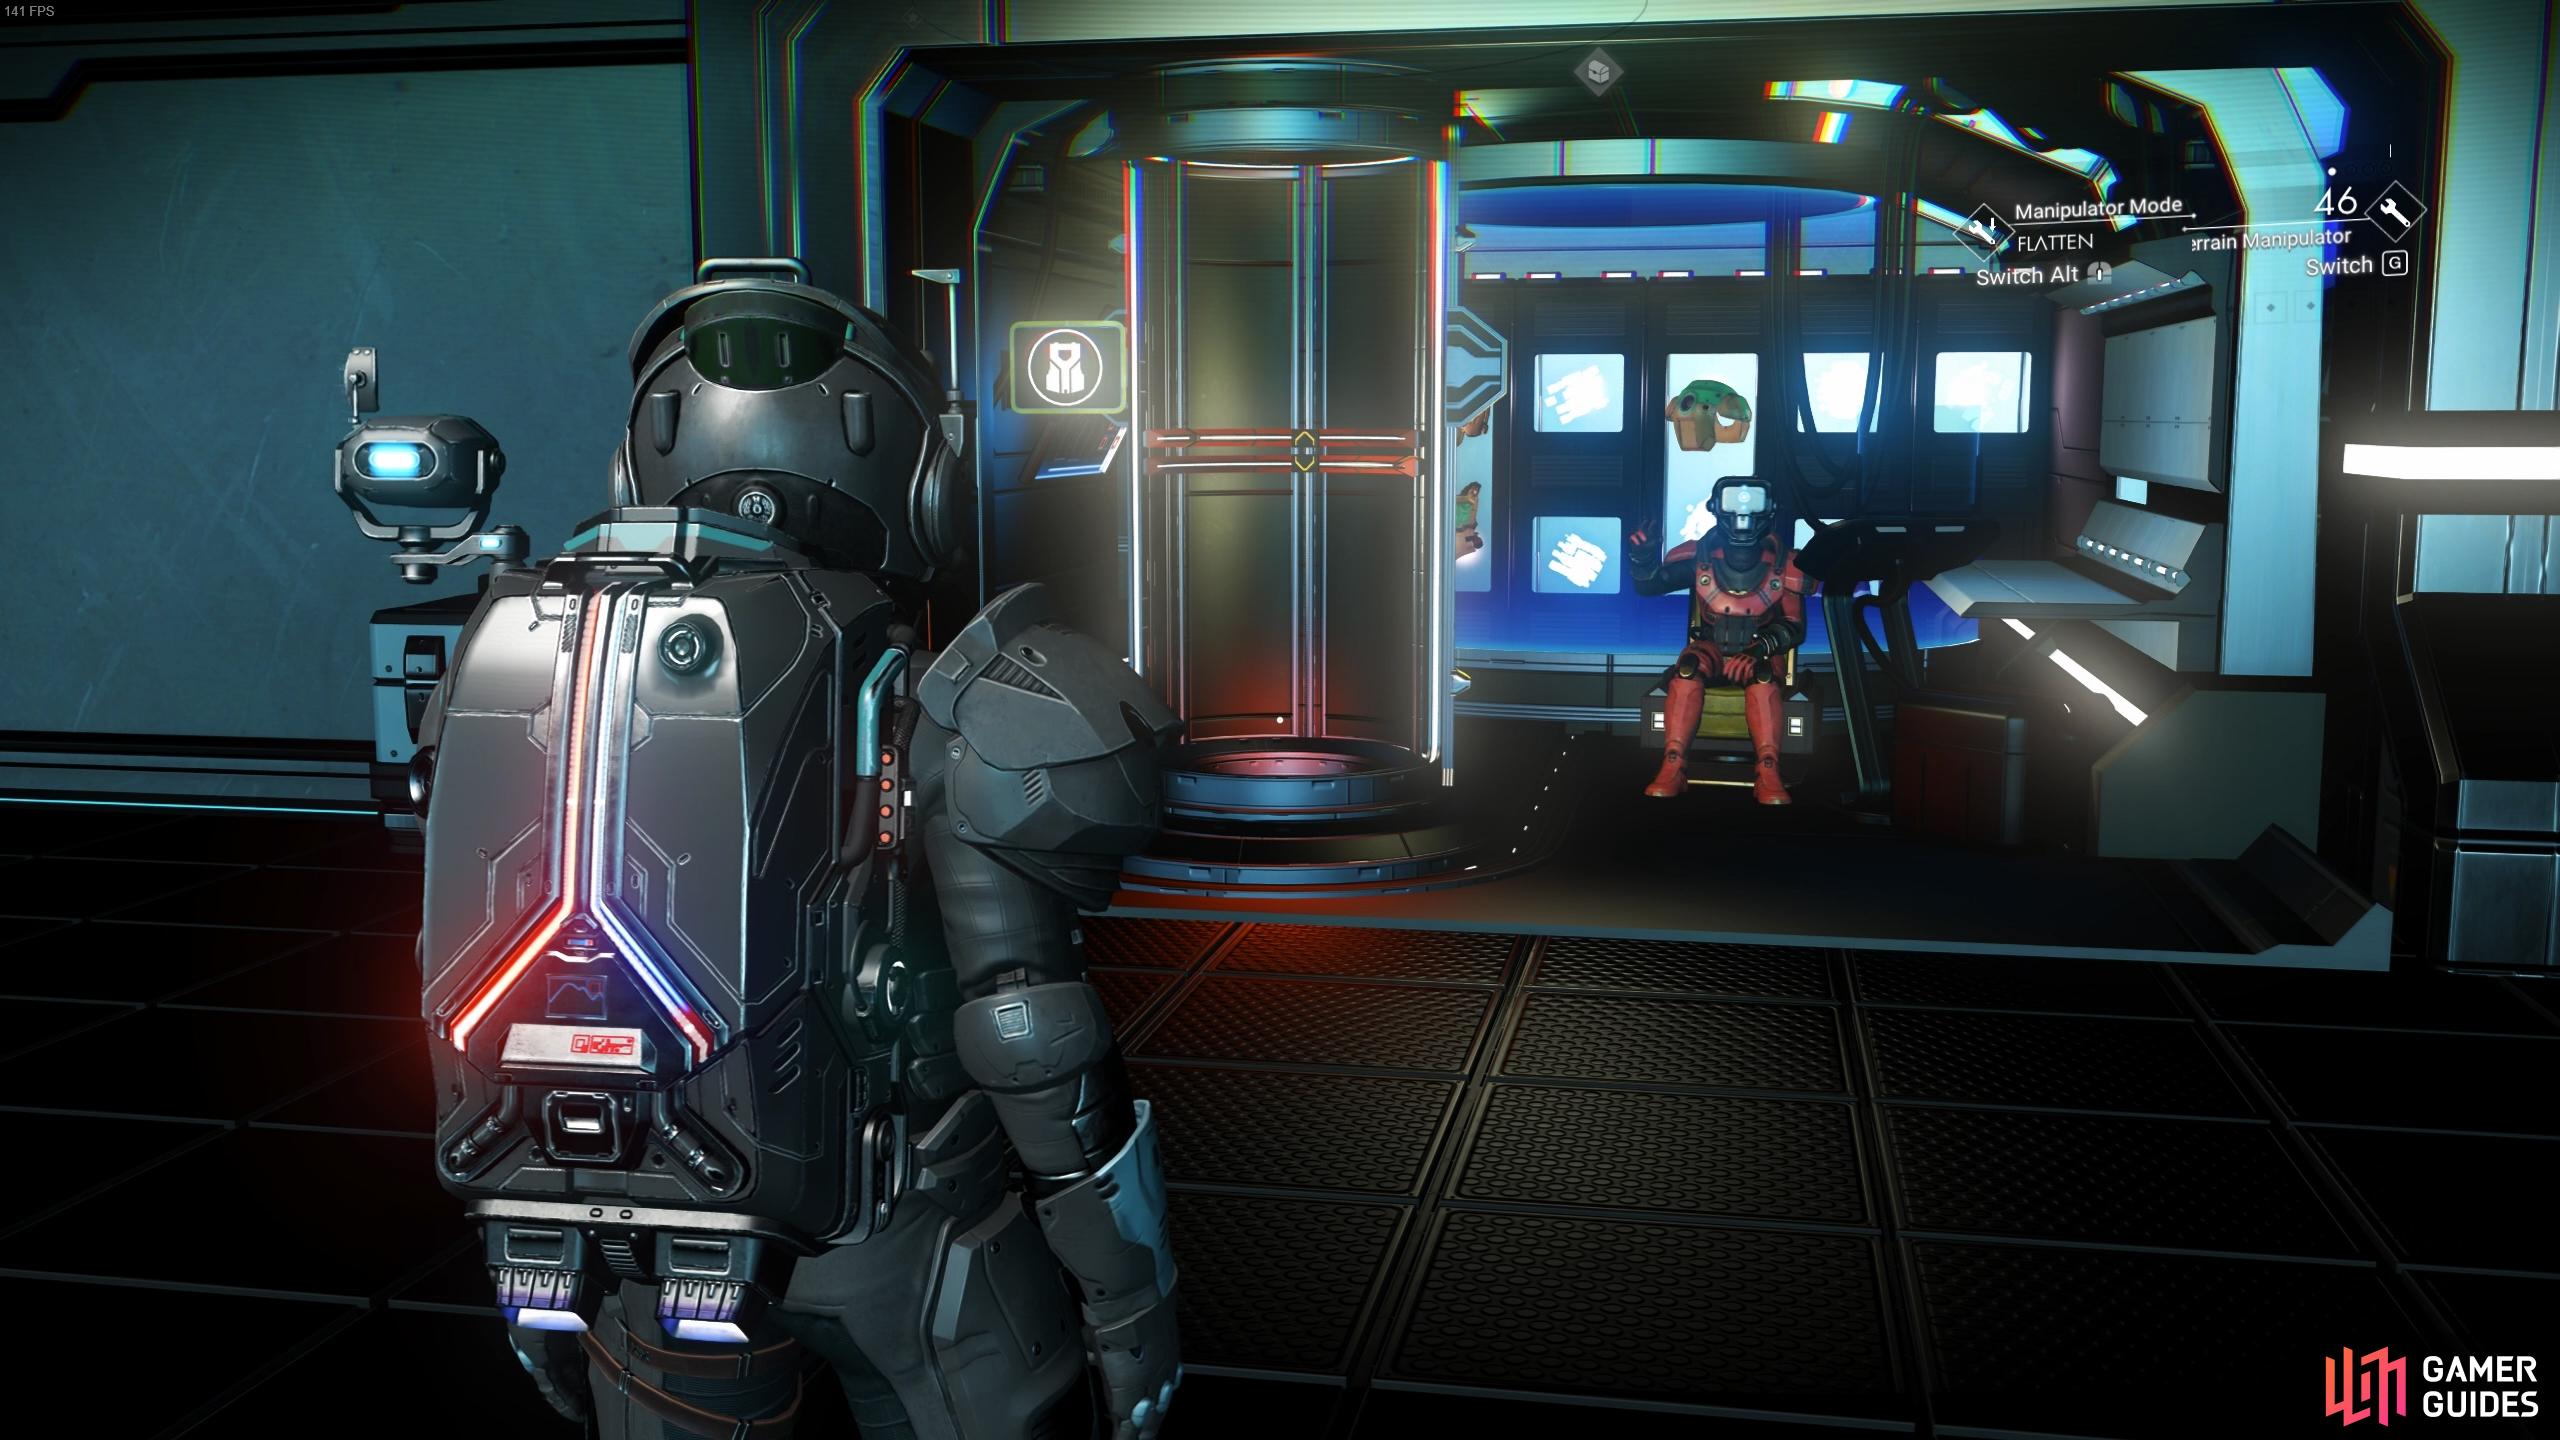 Any space station will have an Exosuit Research merchant, where you can purchase inventory slots.